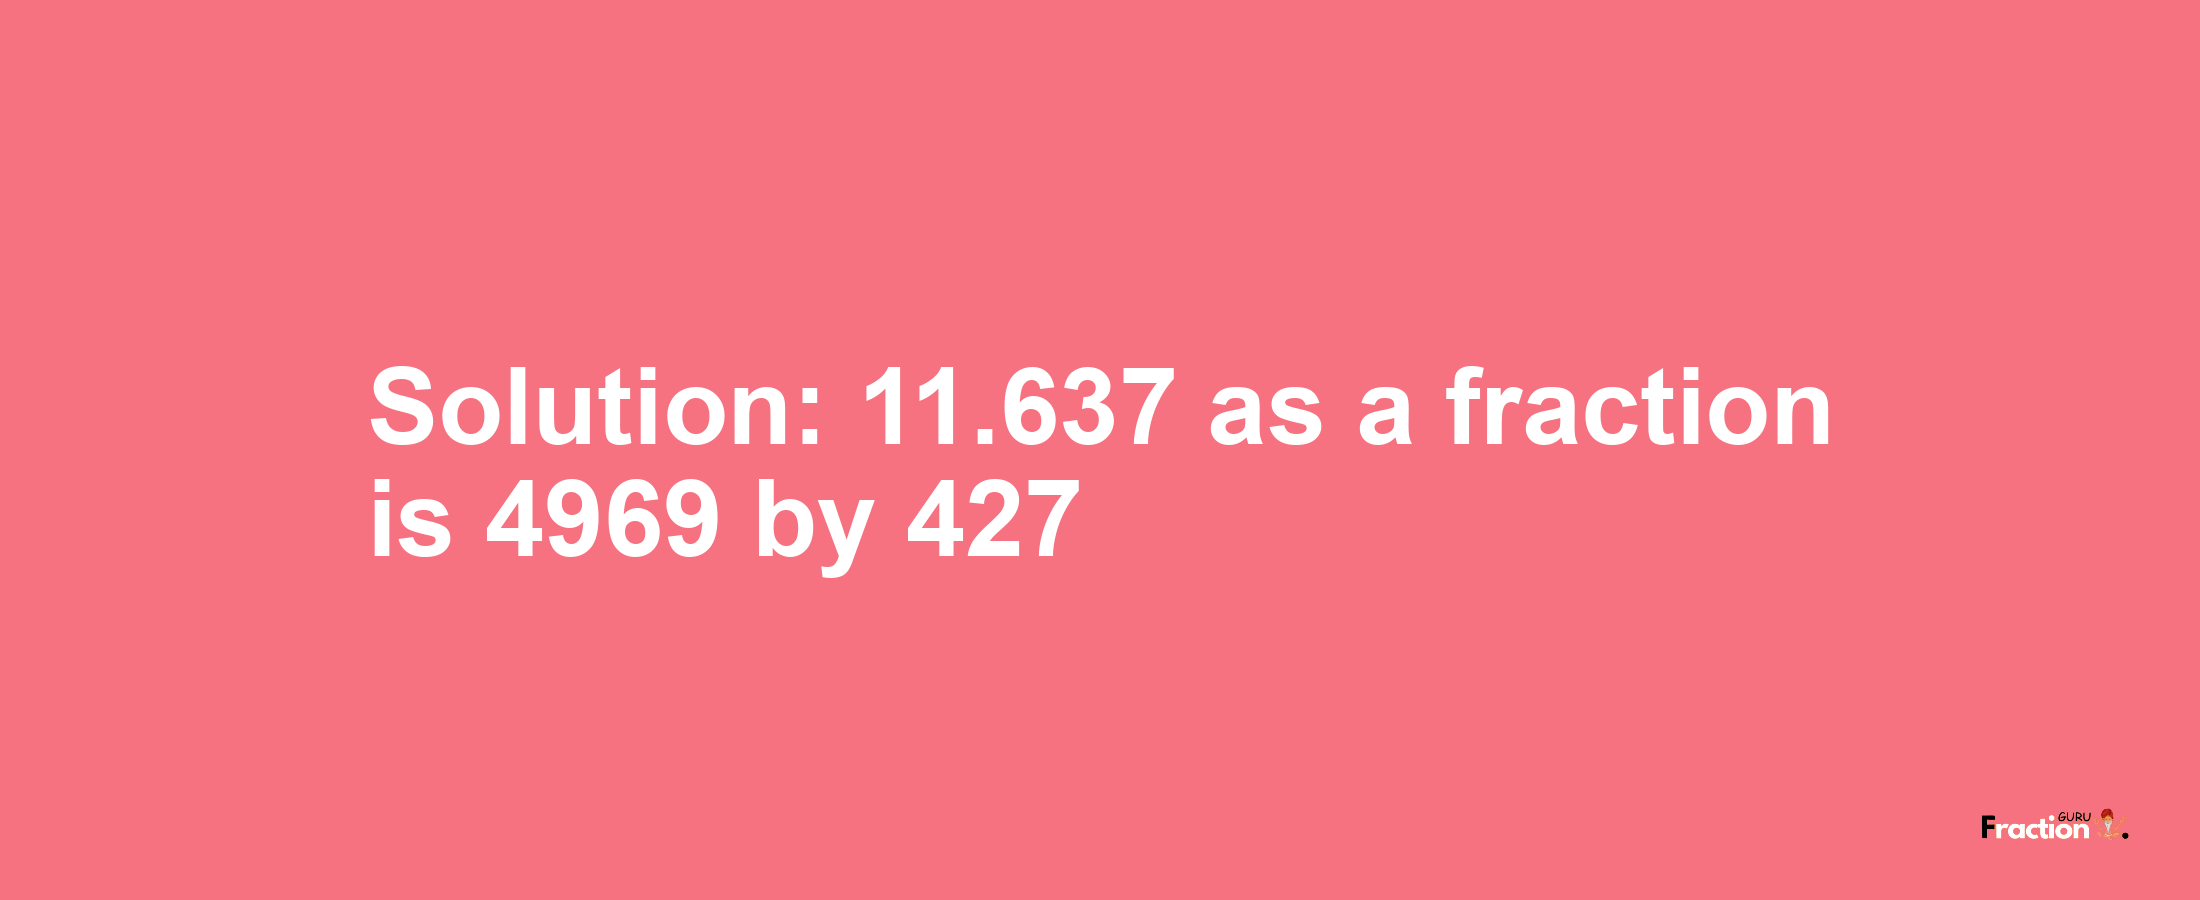 Solution:11.637 as a fraction is 4969/427